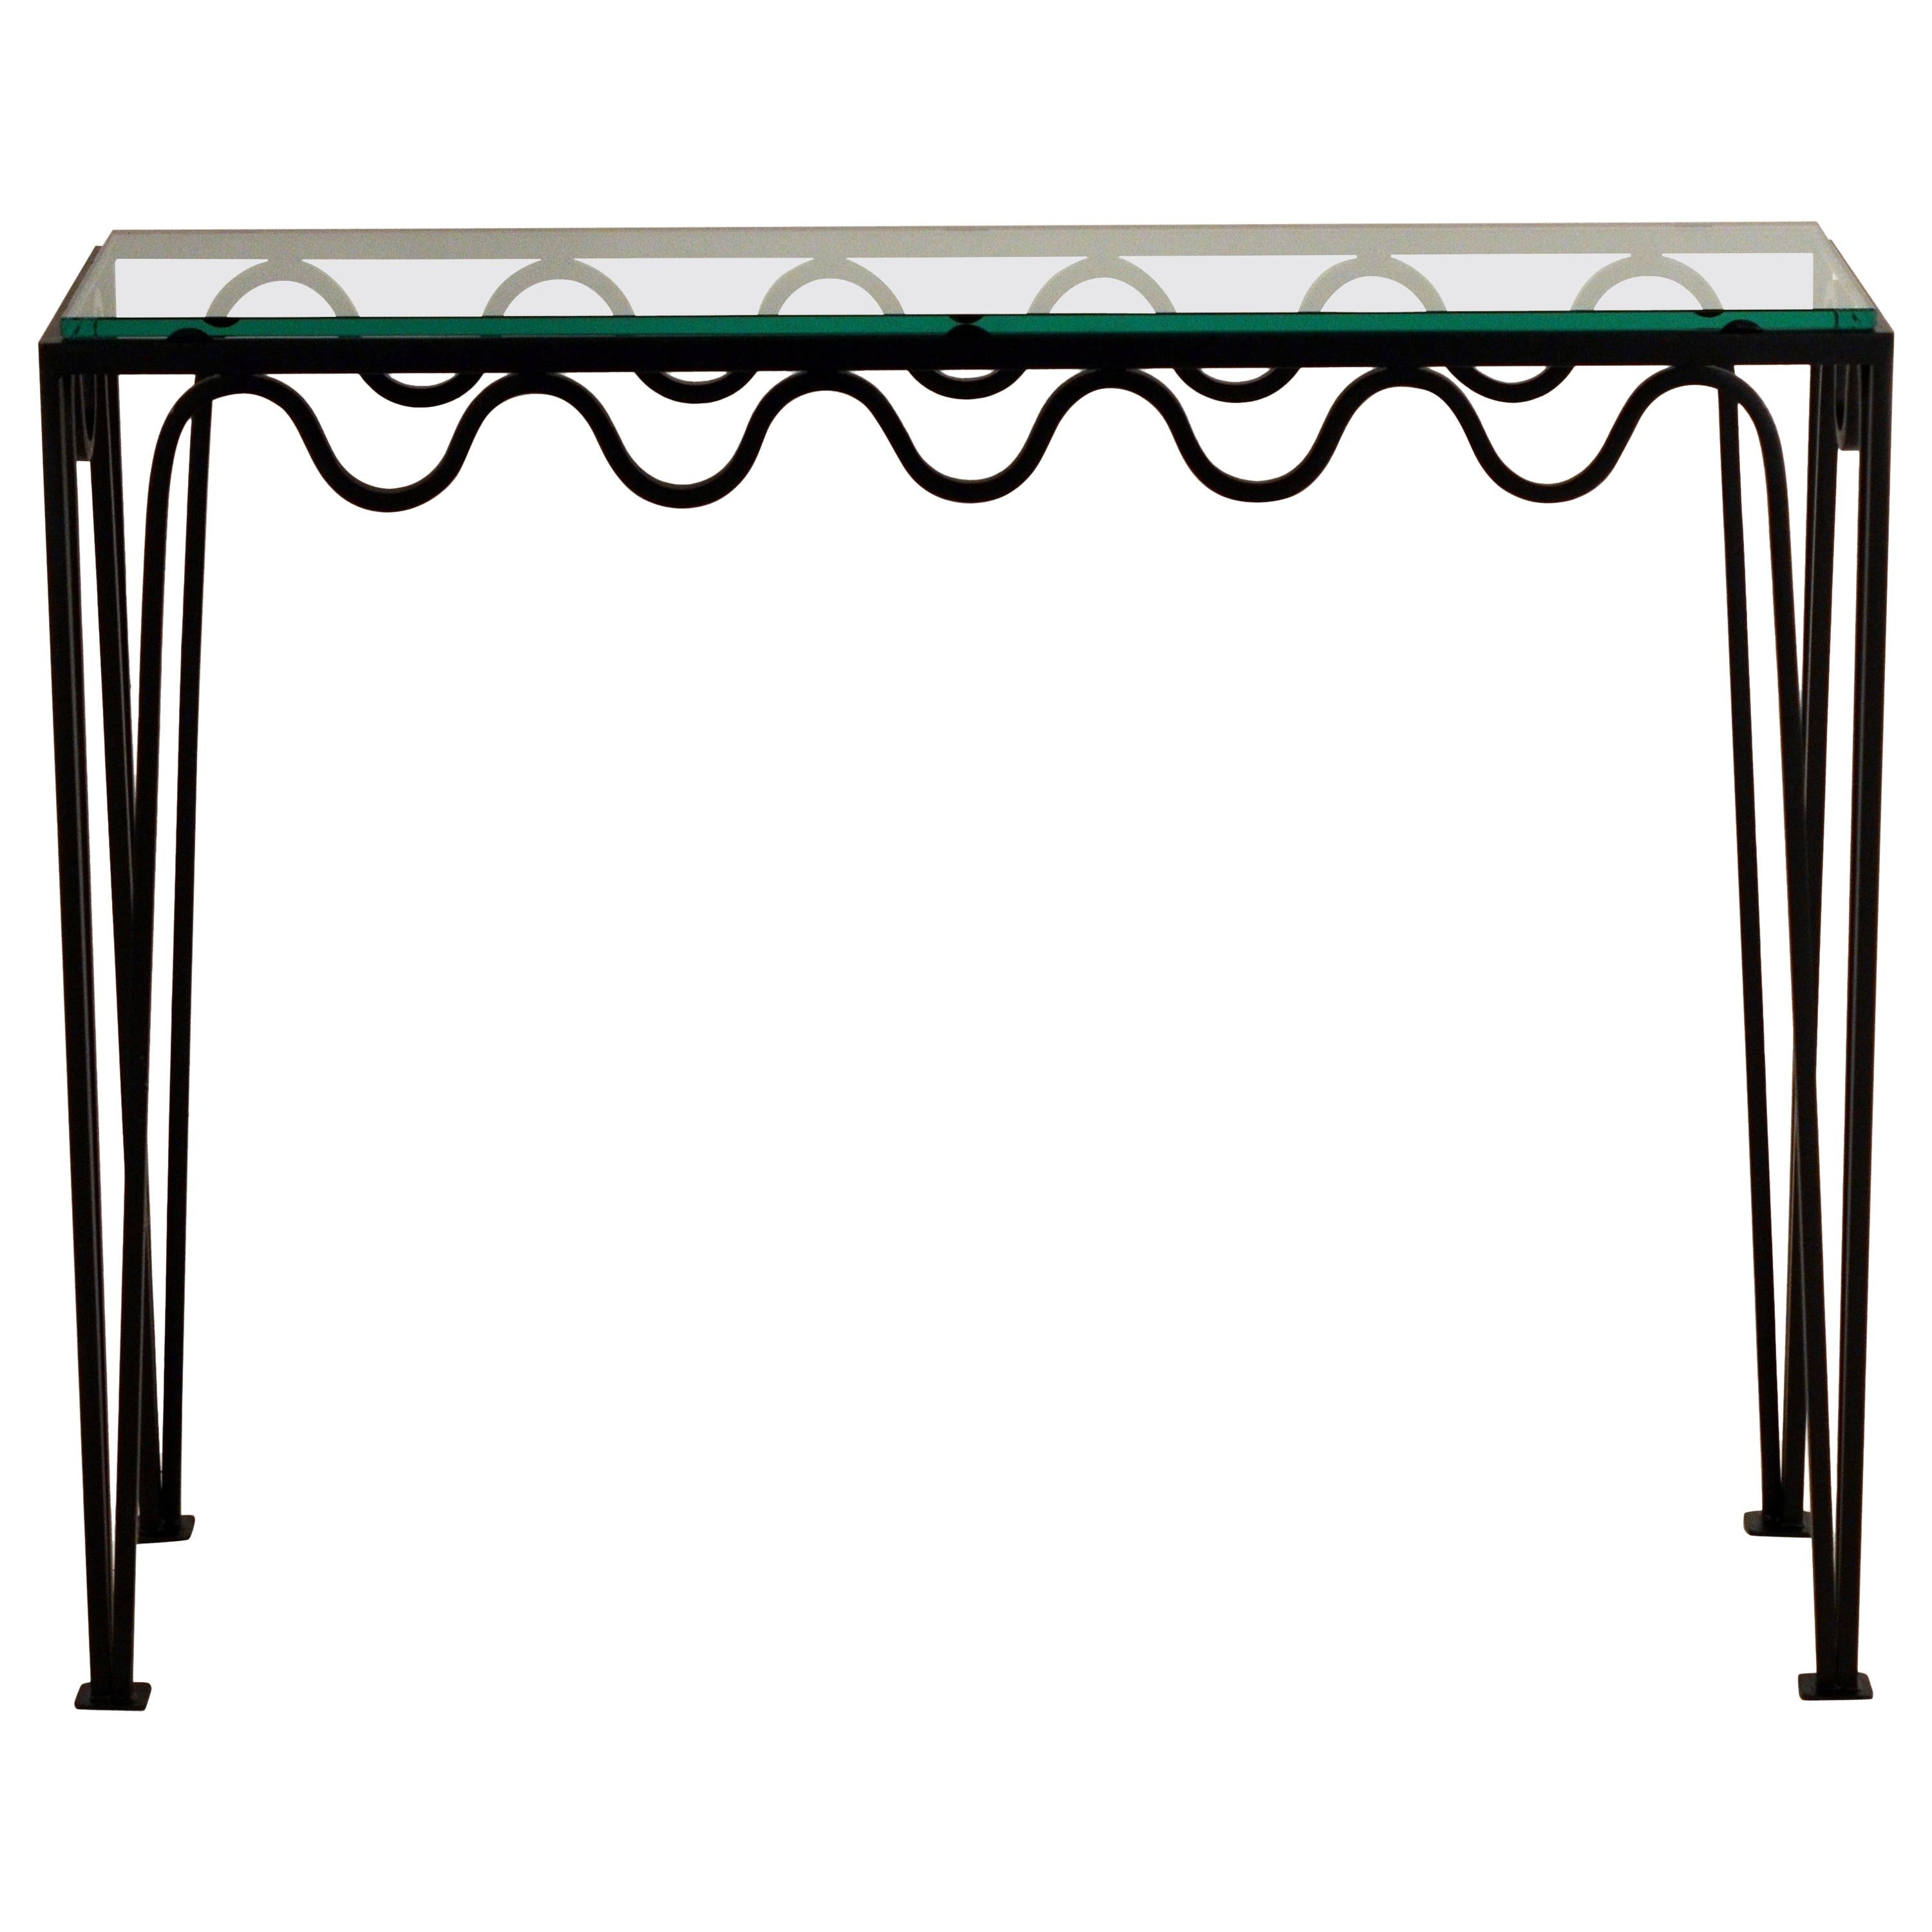 Undulating 'Méandre' Wrought Iron and Glass Console by Design Frères For Sale